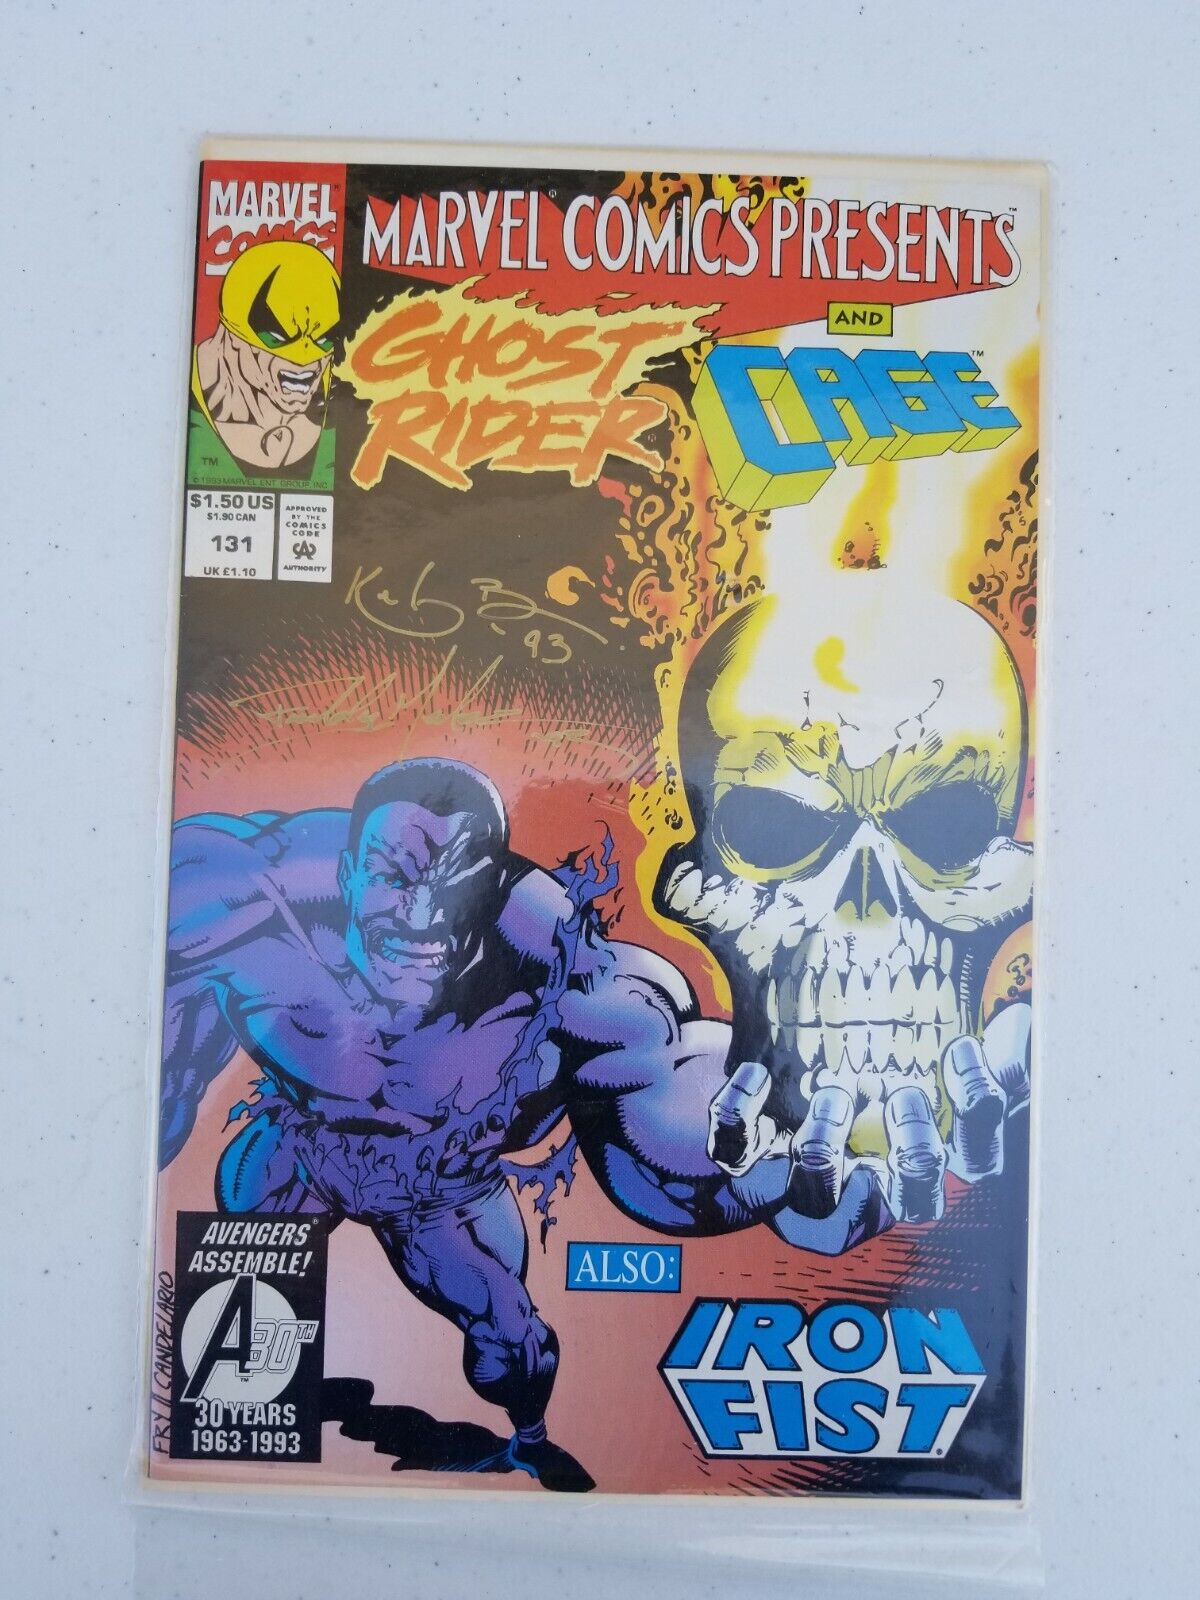 MARVEL COMICS 1993 PRESENTS #131 Autographed by Karl Bollers and Freddy Mendez